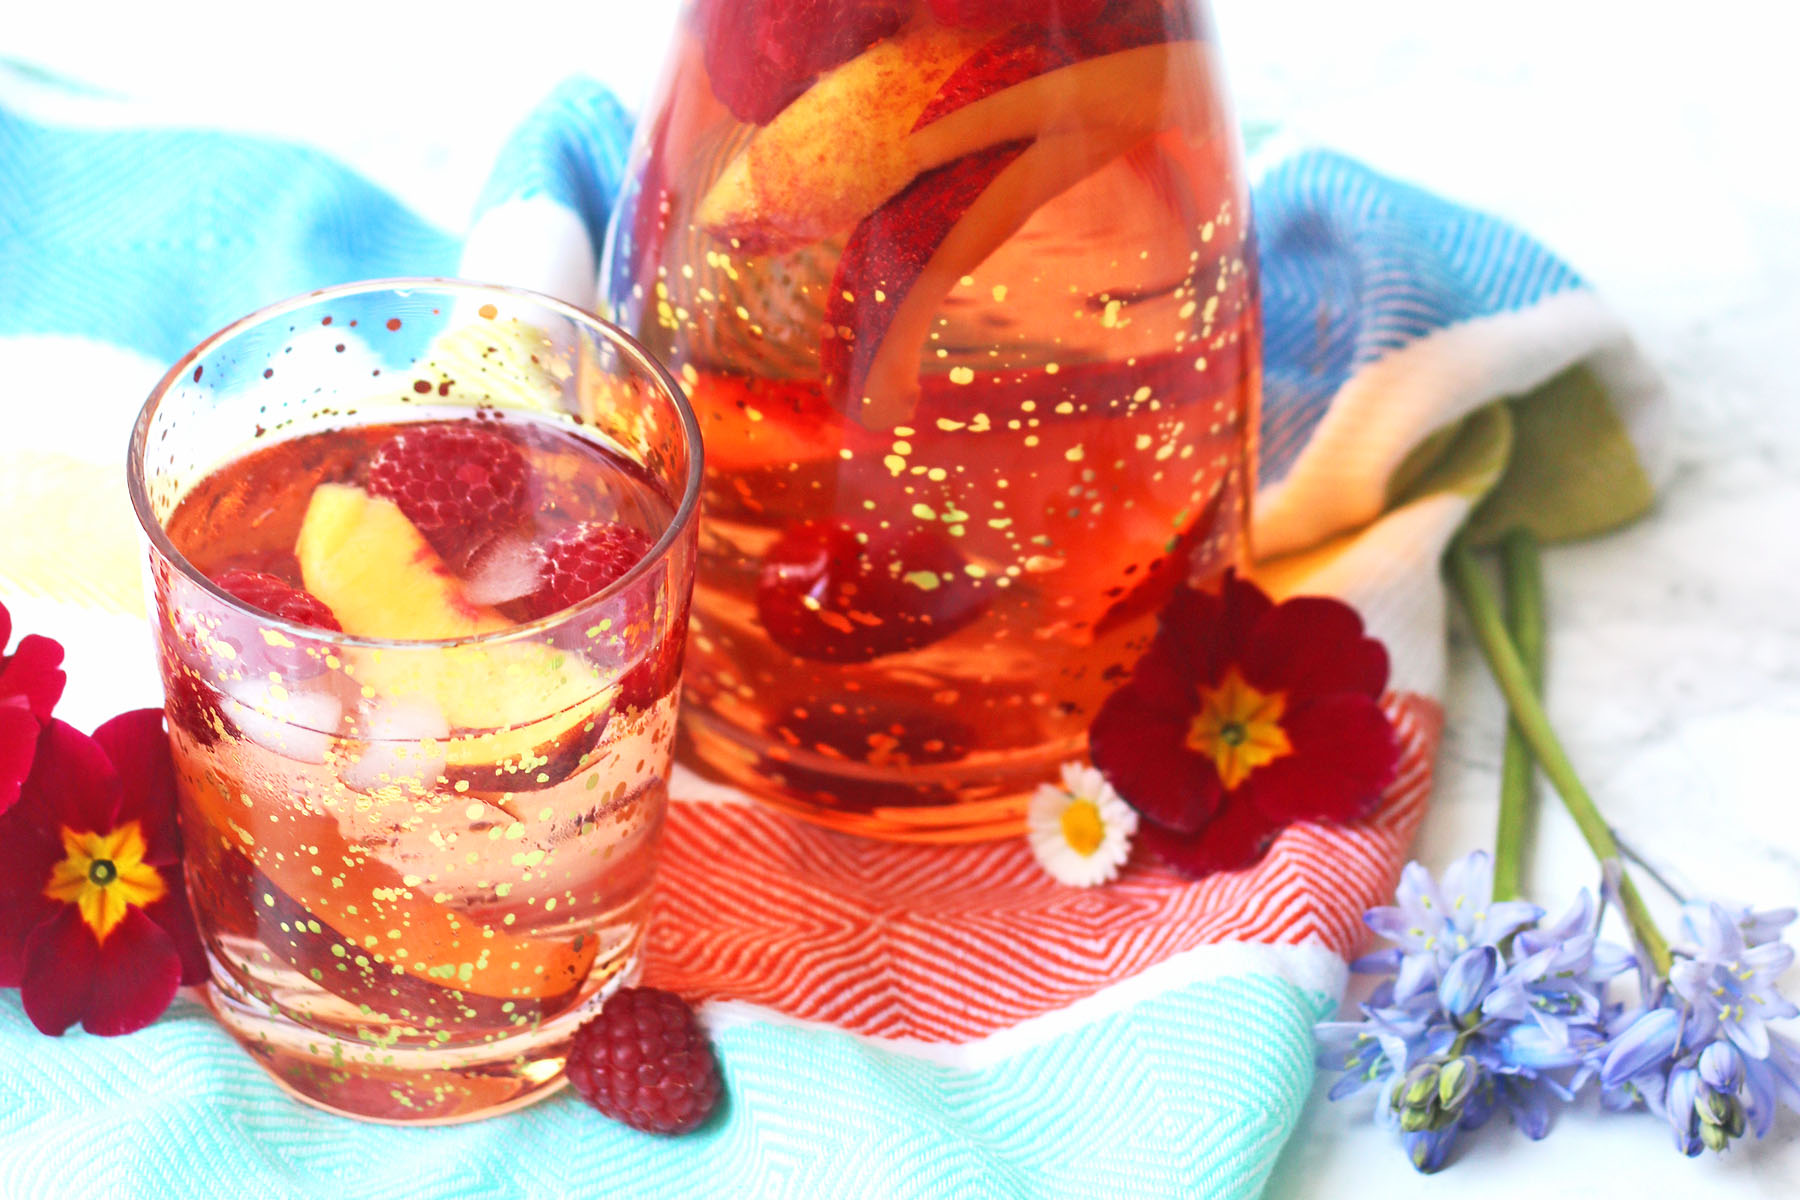 Glass of rose sangria, poured over raspberries and nectarine wedges